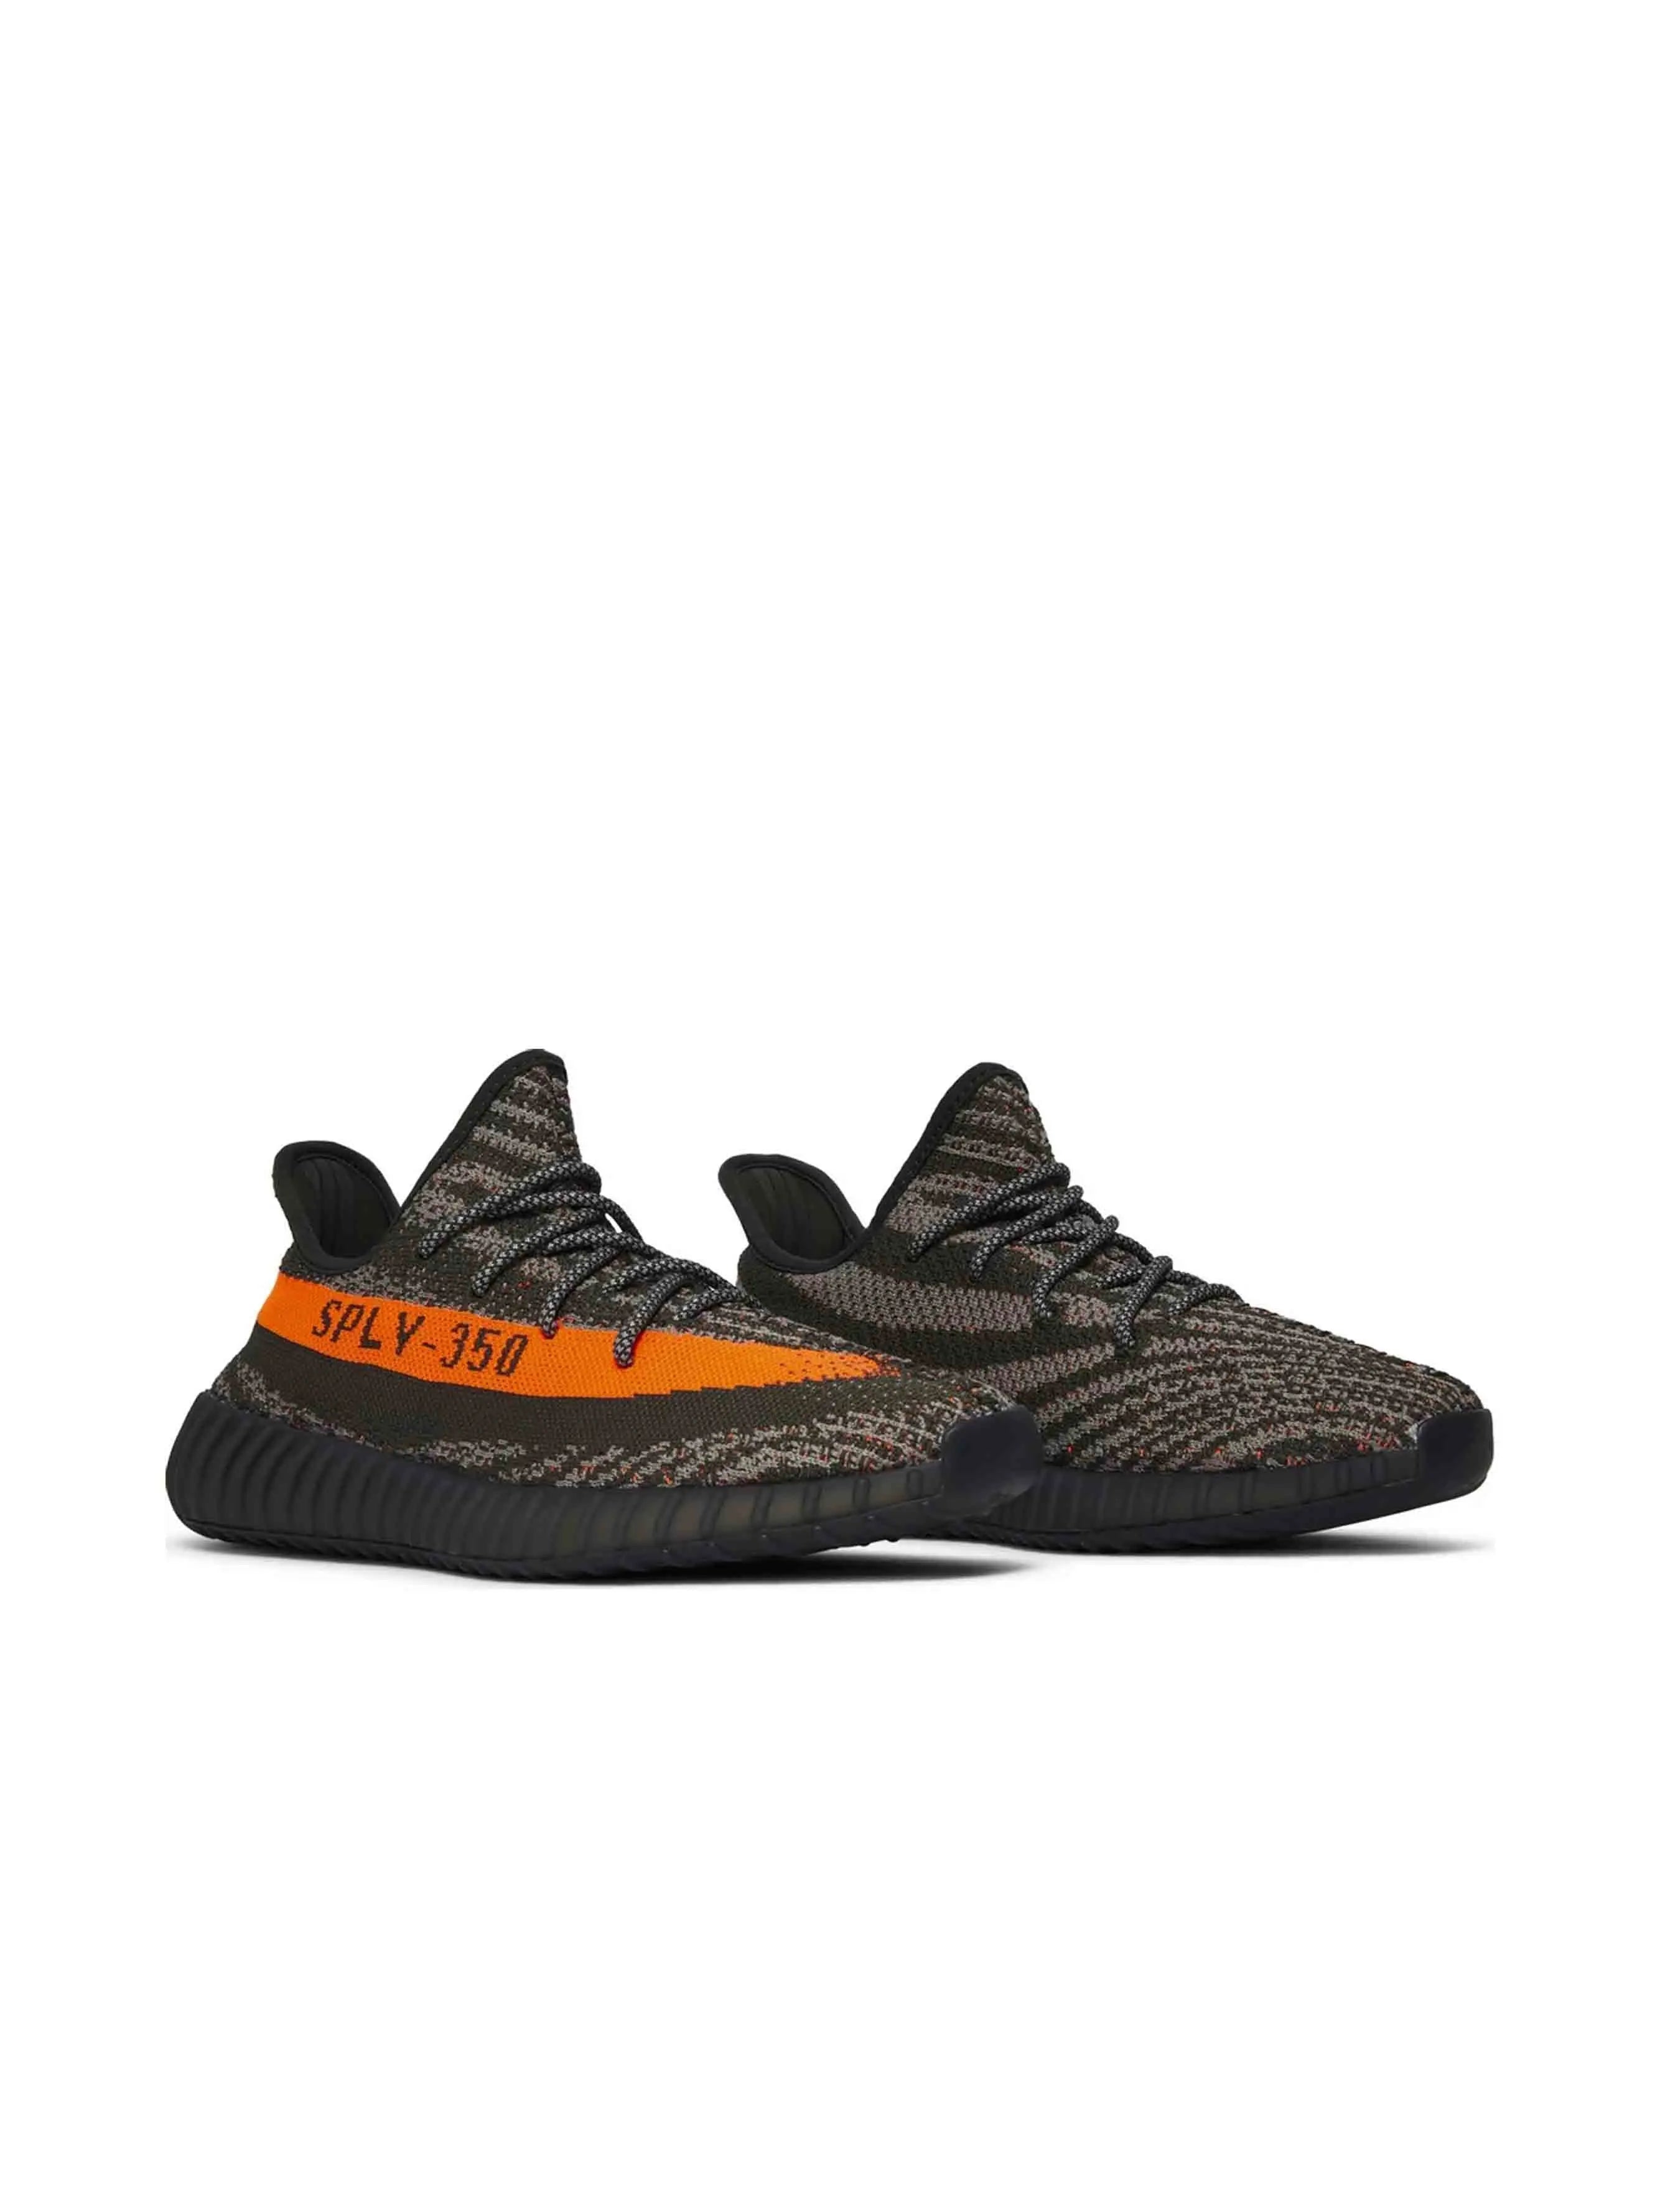 Buy adidas Yeezy Boost 350 V2 Carbon Beluga Online in Auckland ...